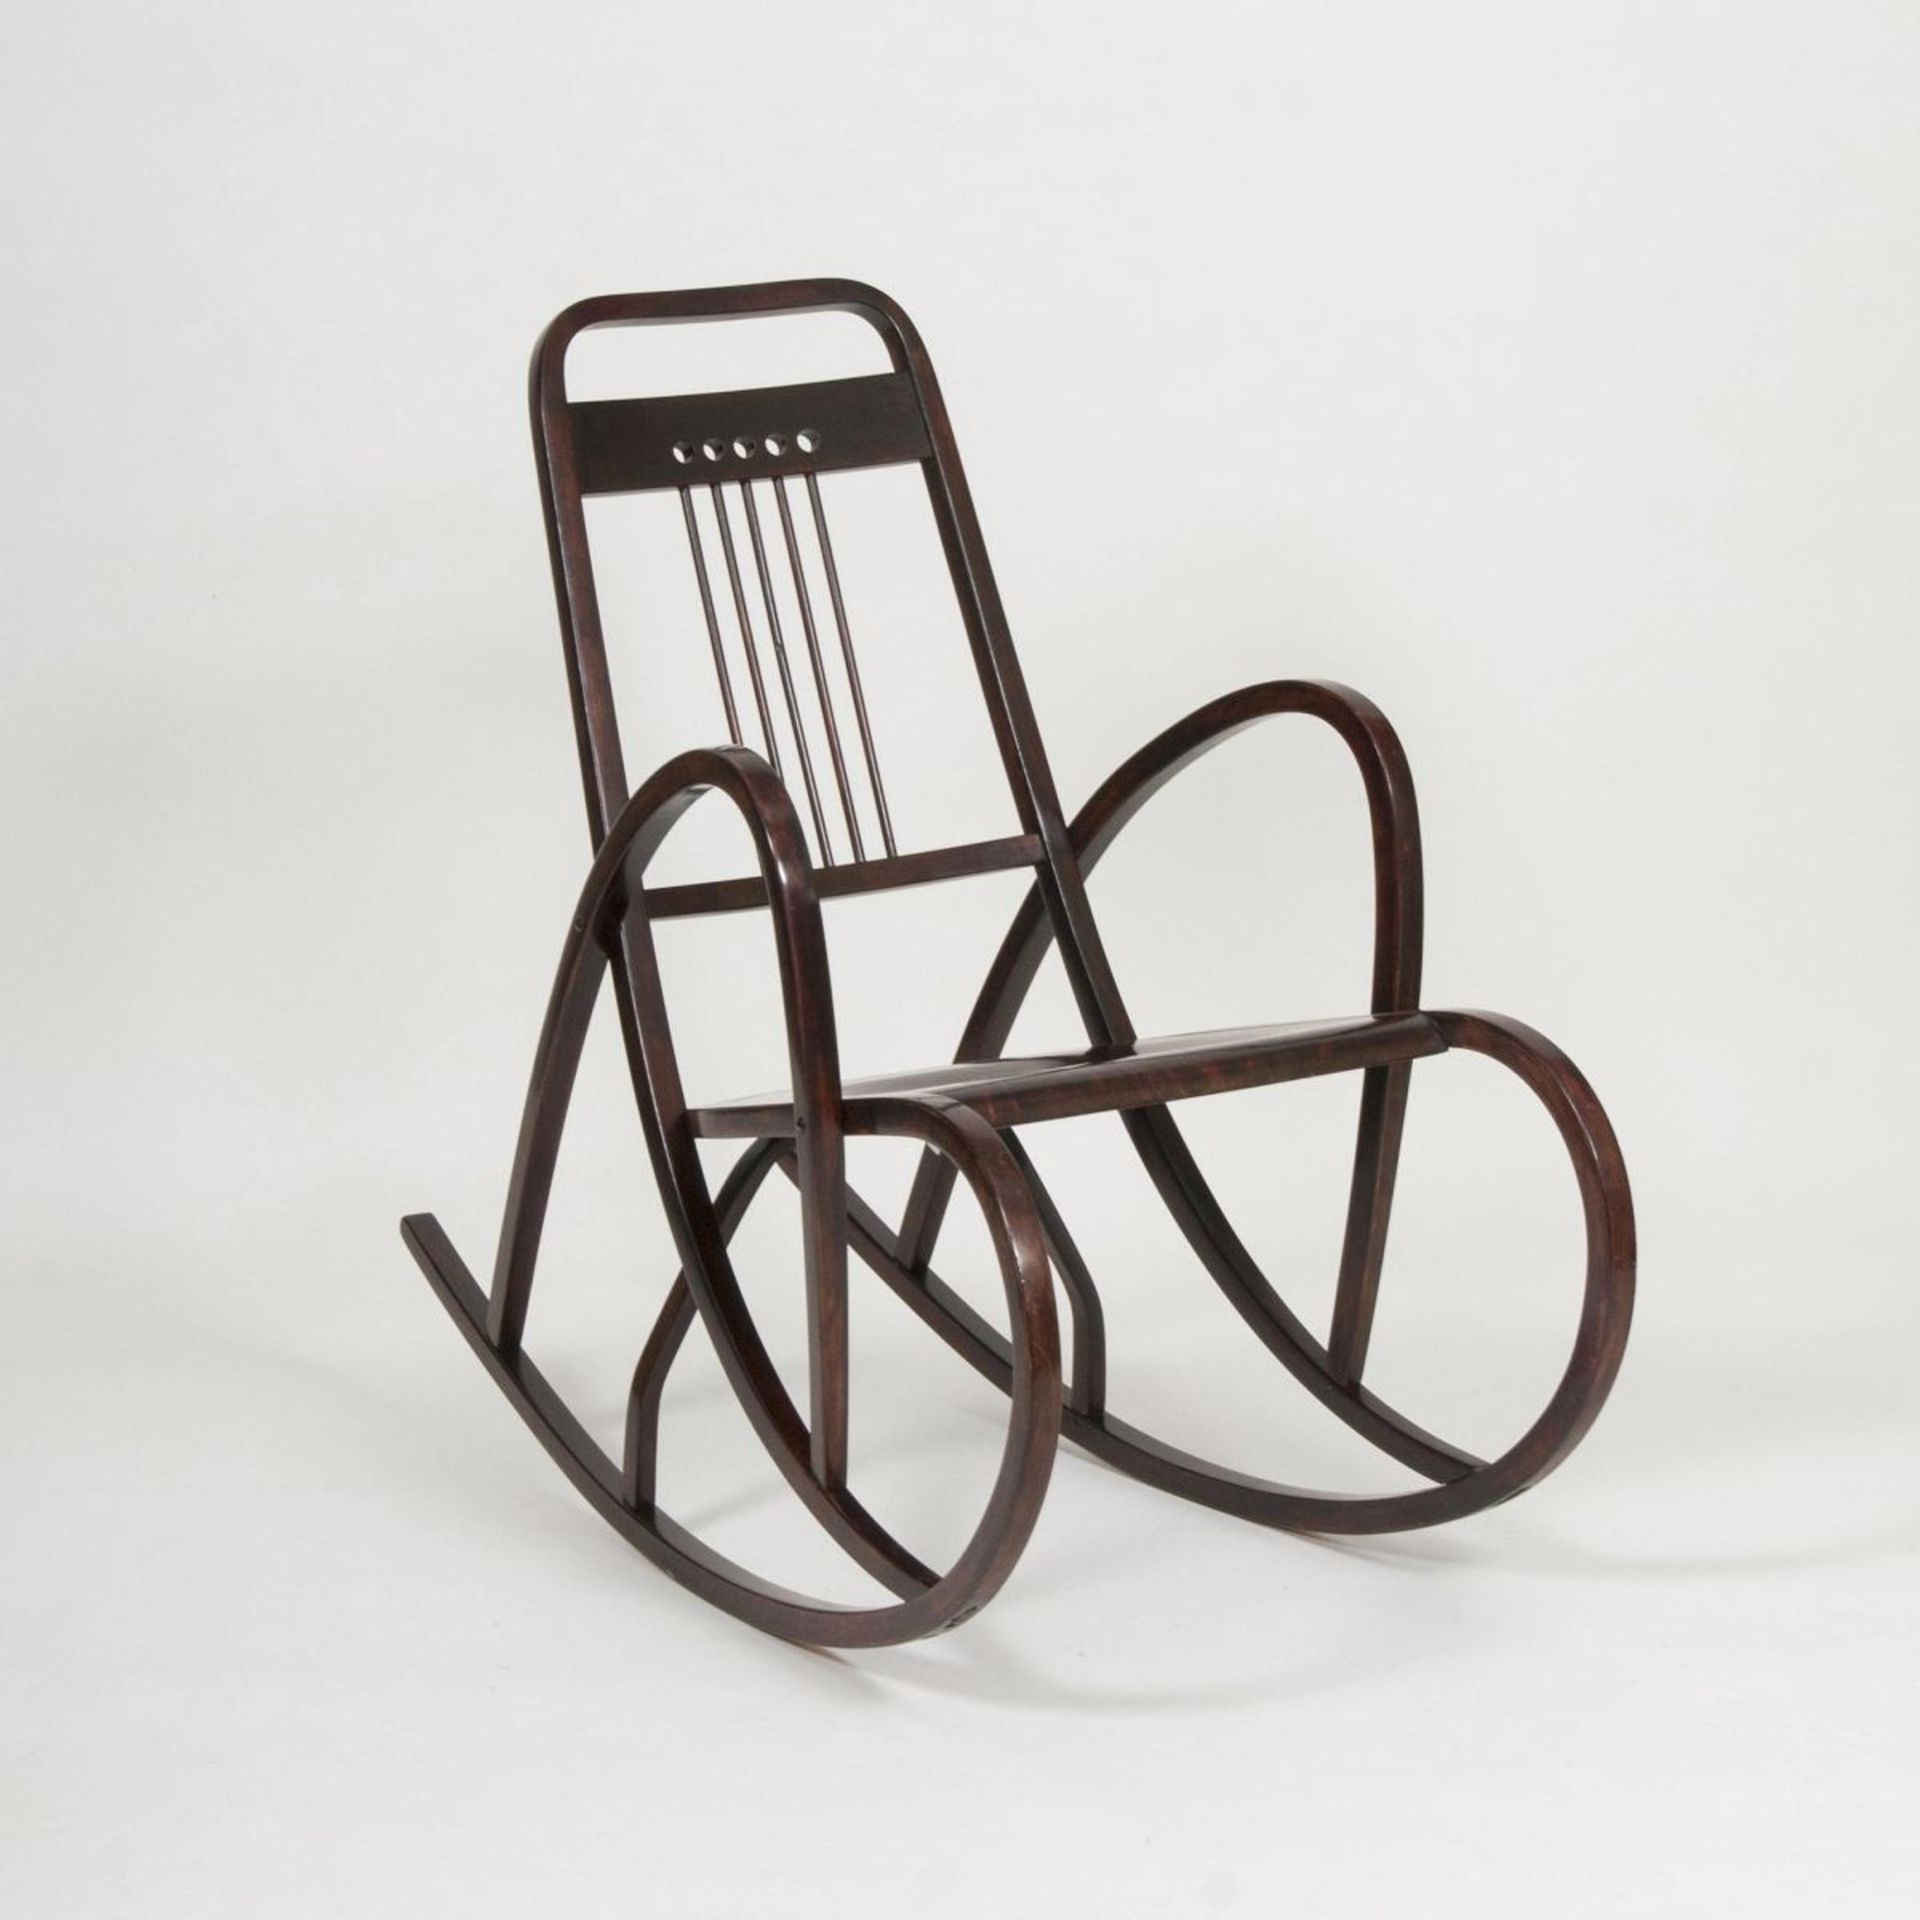 Thonet Brothers, Gebrüderactive 19th/20h cent.A Rocking Chair No. 511Designed around 1906/07.